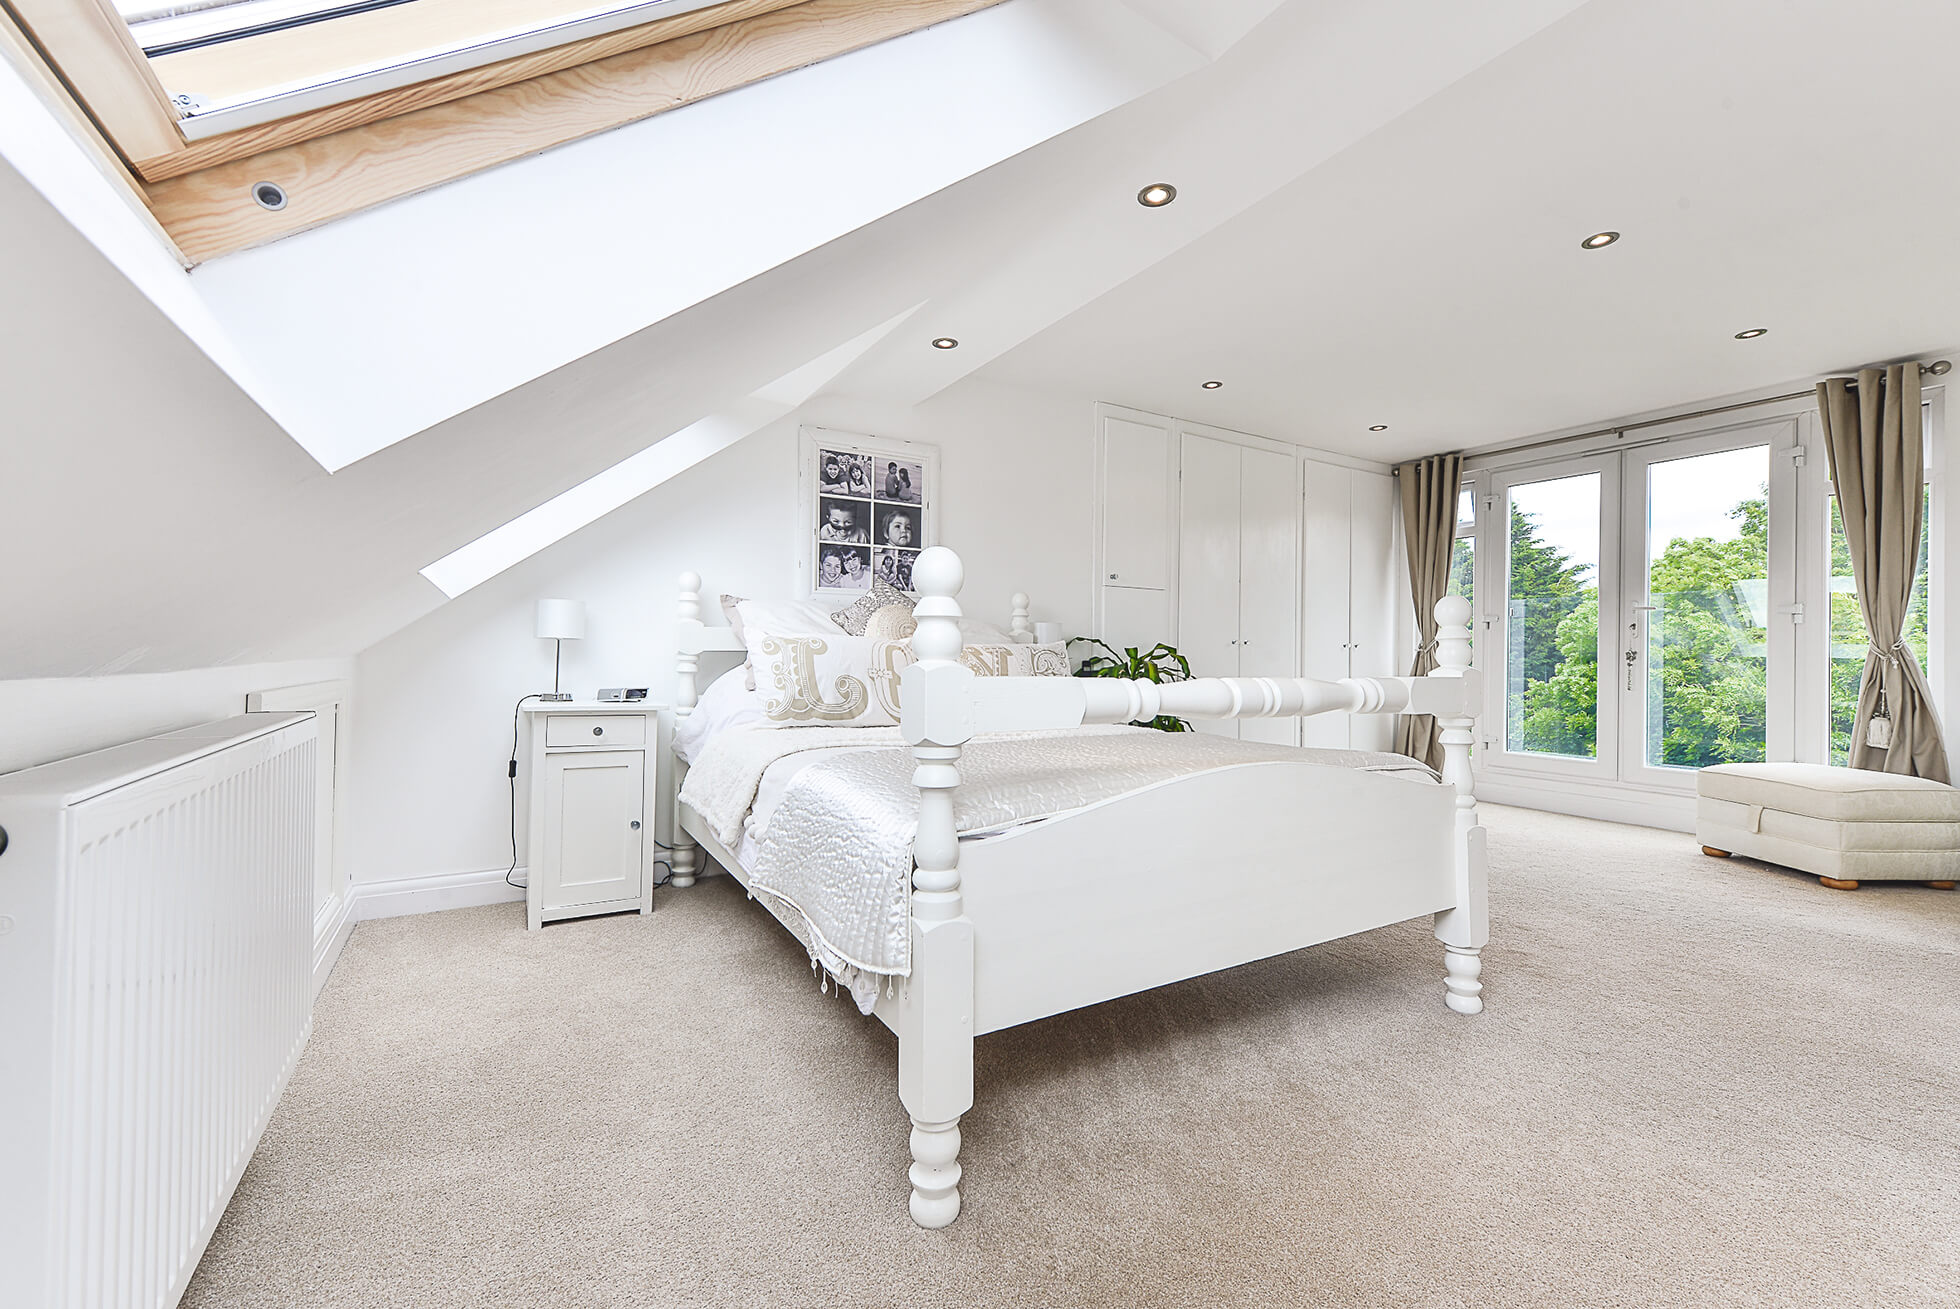 Do you have a question about converting your Loft in Bayfordbury? Here are the most popular questions asked by our clients.